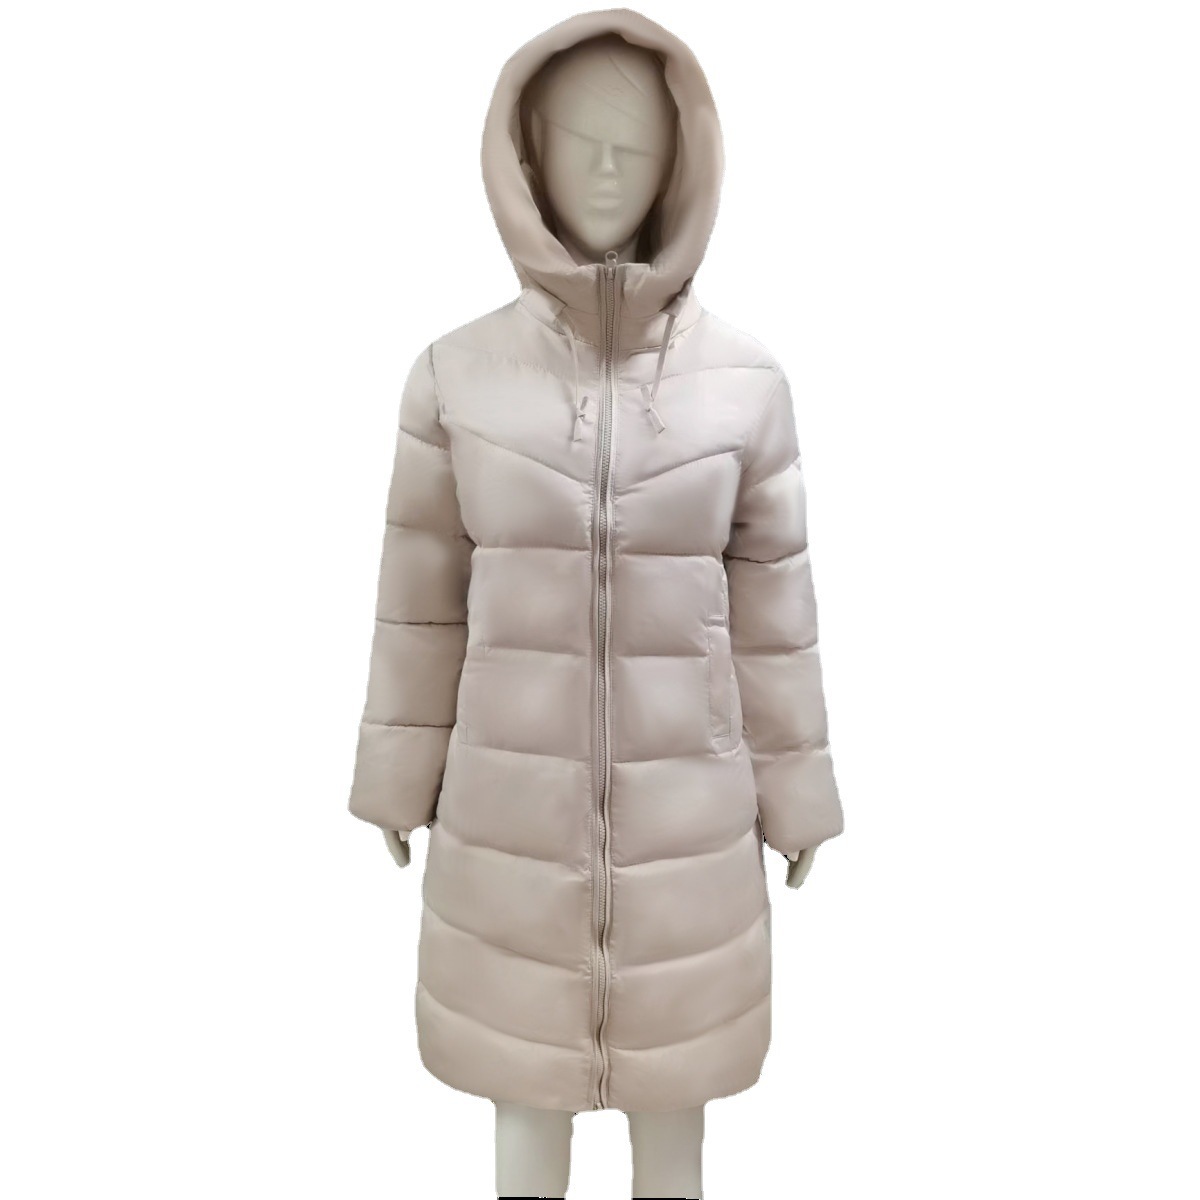 Womens Winter Snow Set: Hooded Winter Dress With Down Cotton Jacket And  Coat From Cinda02, $50.17